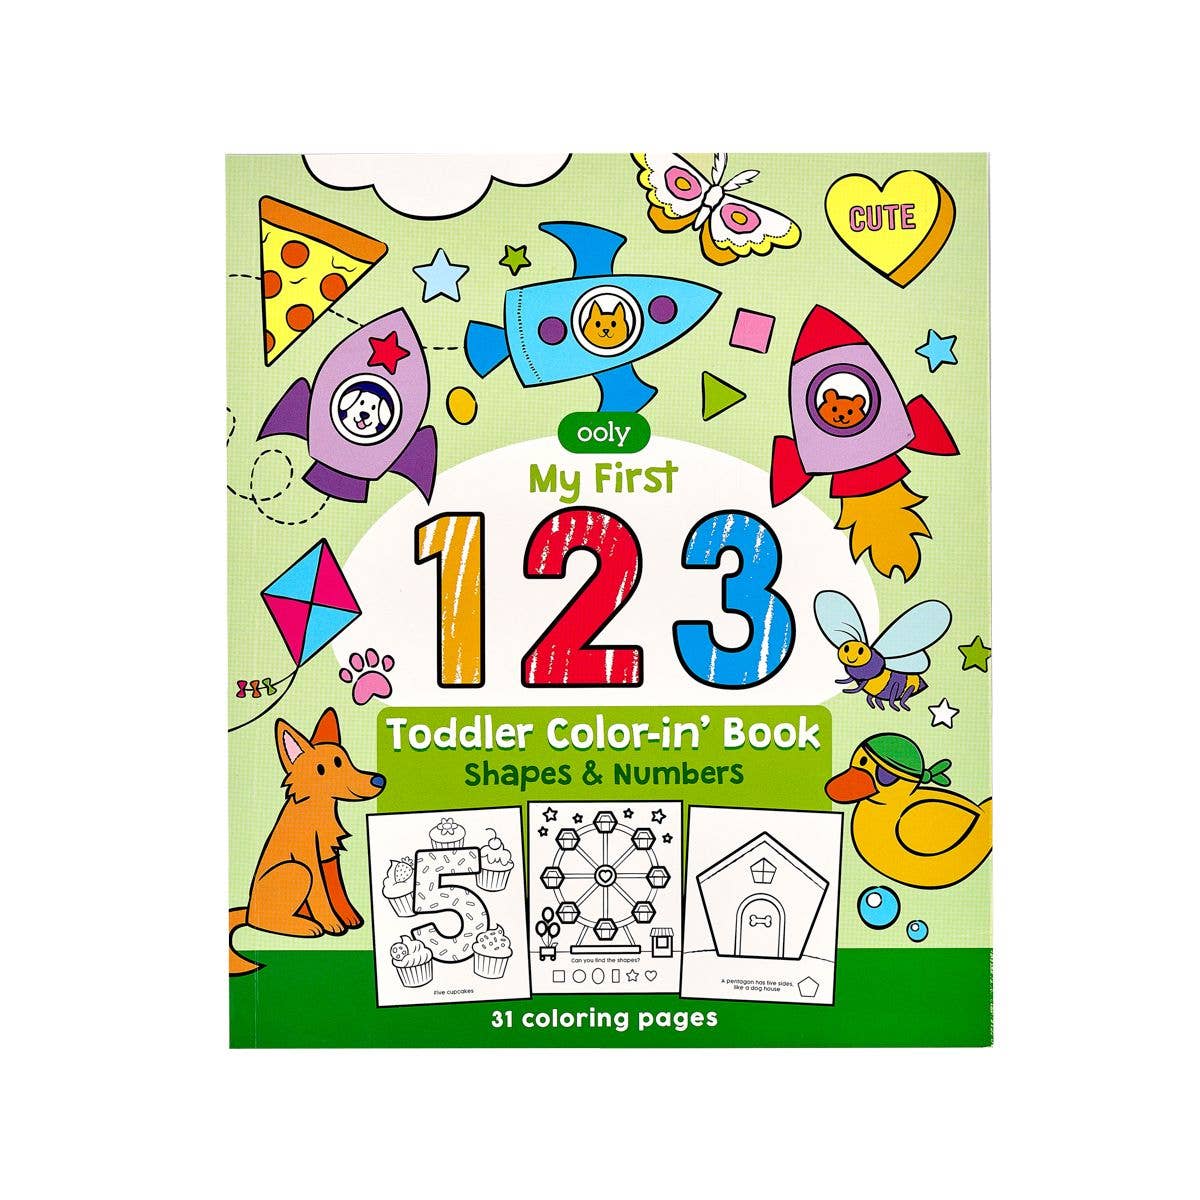 Color-in' Book: 123: Shapes + Numbers